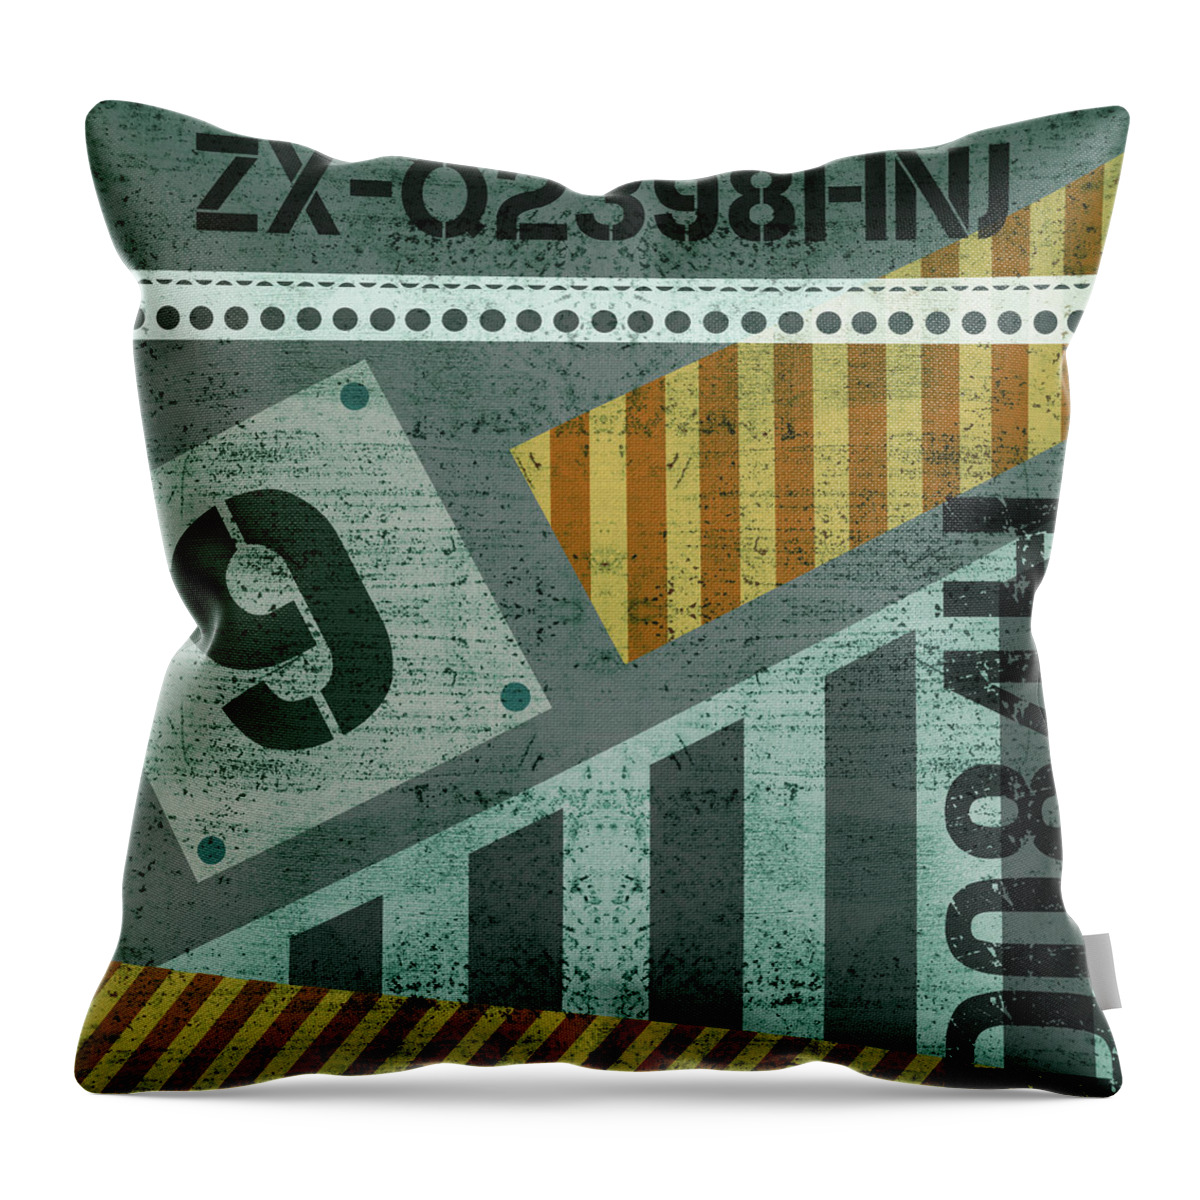 Abstract Throw Pillow featuring the mixed media Contemporary Abstract Industrial Art - Distressed Metal - Olive by Studio Grafiikka